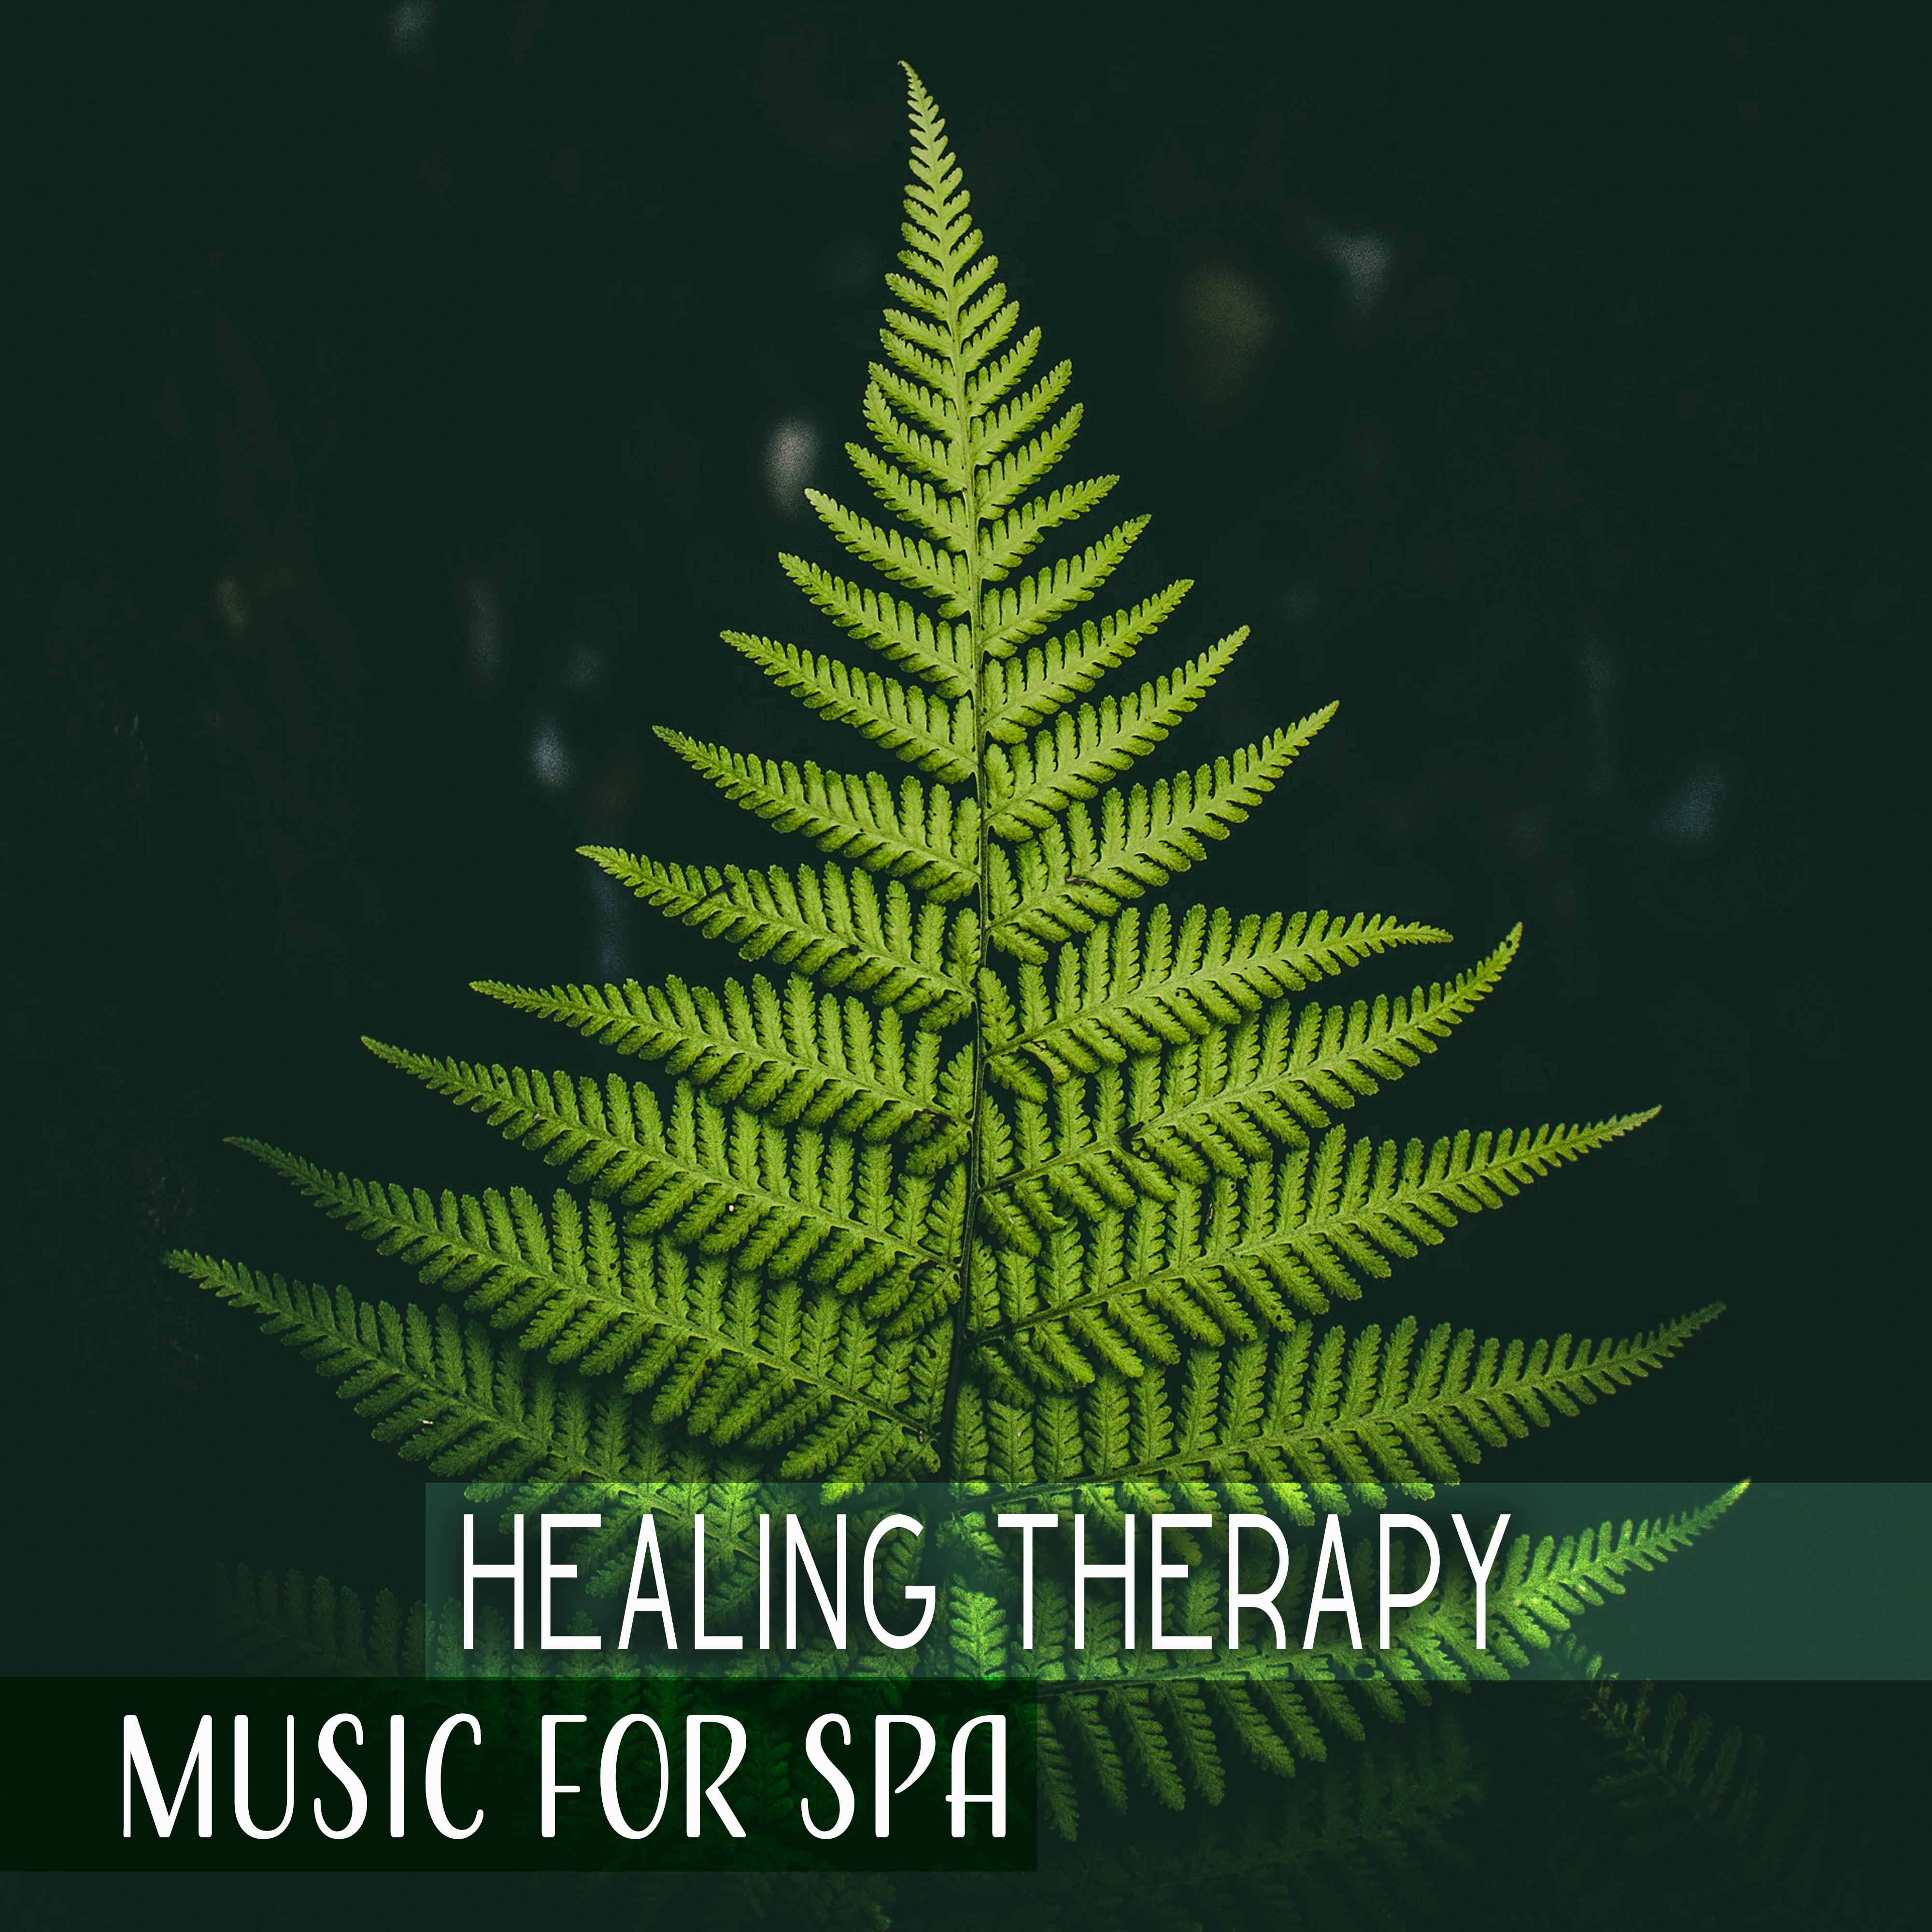 Healing Therapy Music for Spa  Calming Nature Sounds, Music for Spa, Wellness, Relaxation, Zen